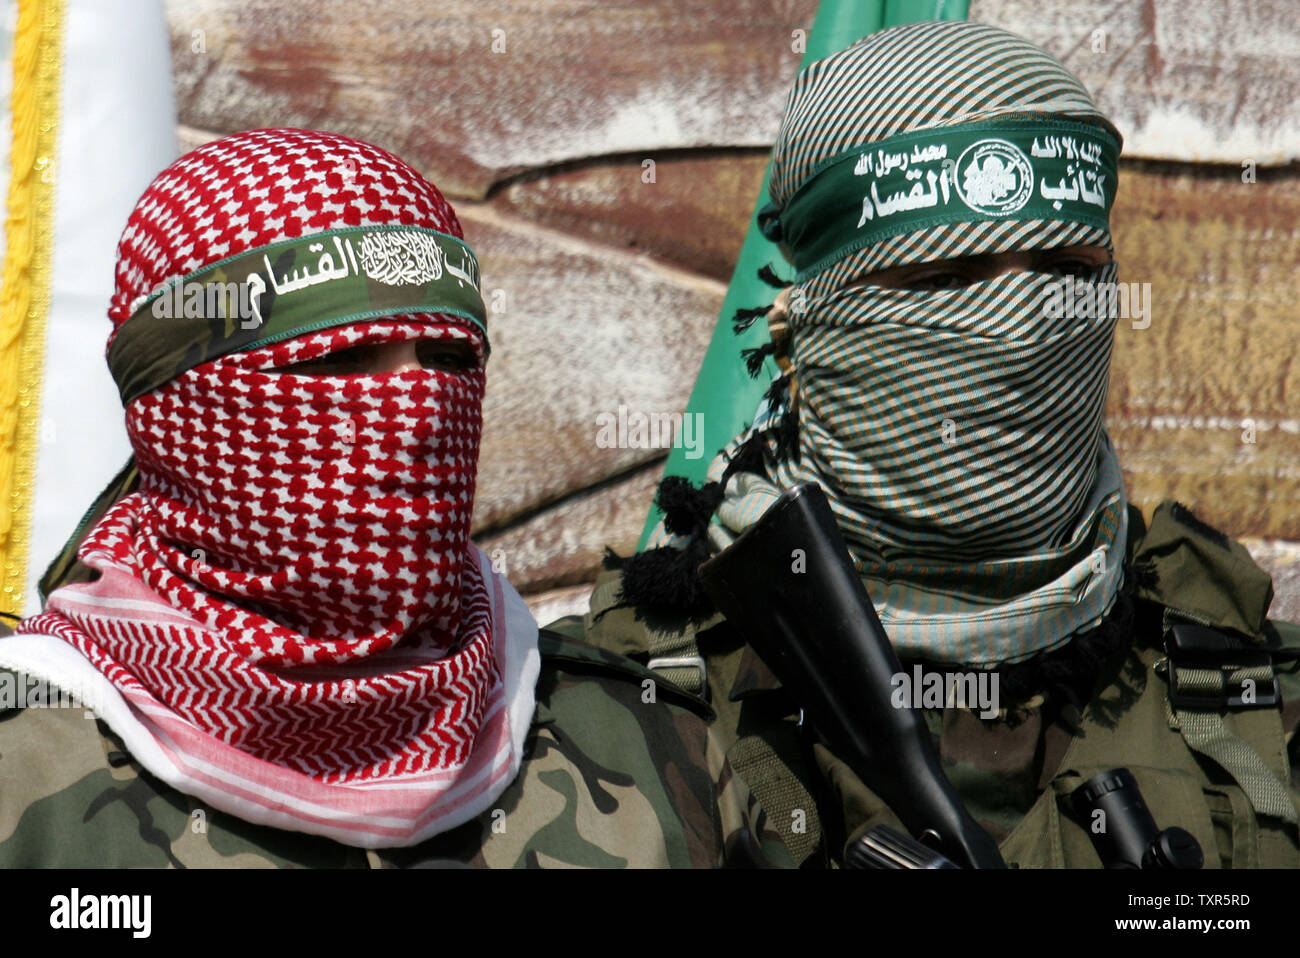 Abu Obaida (L), the spokesman for the Ezzedine Al-Qassam Brigades, the armed wing of Hamas, speaks during a news conference on October 18, 2012 at the Rafah border crossing with Egypt in the southern Gaza Strip to mark the first anniversary of a deal which saw the exchange of 1,027 Palestinian prisoners for captured Israeli soldier Gilad Shalit. The snatching of Israeli soldier Gilad Shalit in June 2006 by a group of Hamas militants and others sparked a more than five-year crisis for Israel, which finally ended on October 18, 2011. UPI/Ismael Mohamad Stock Photo